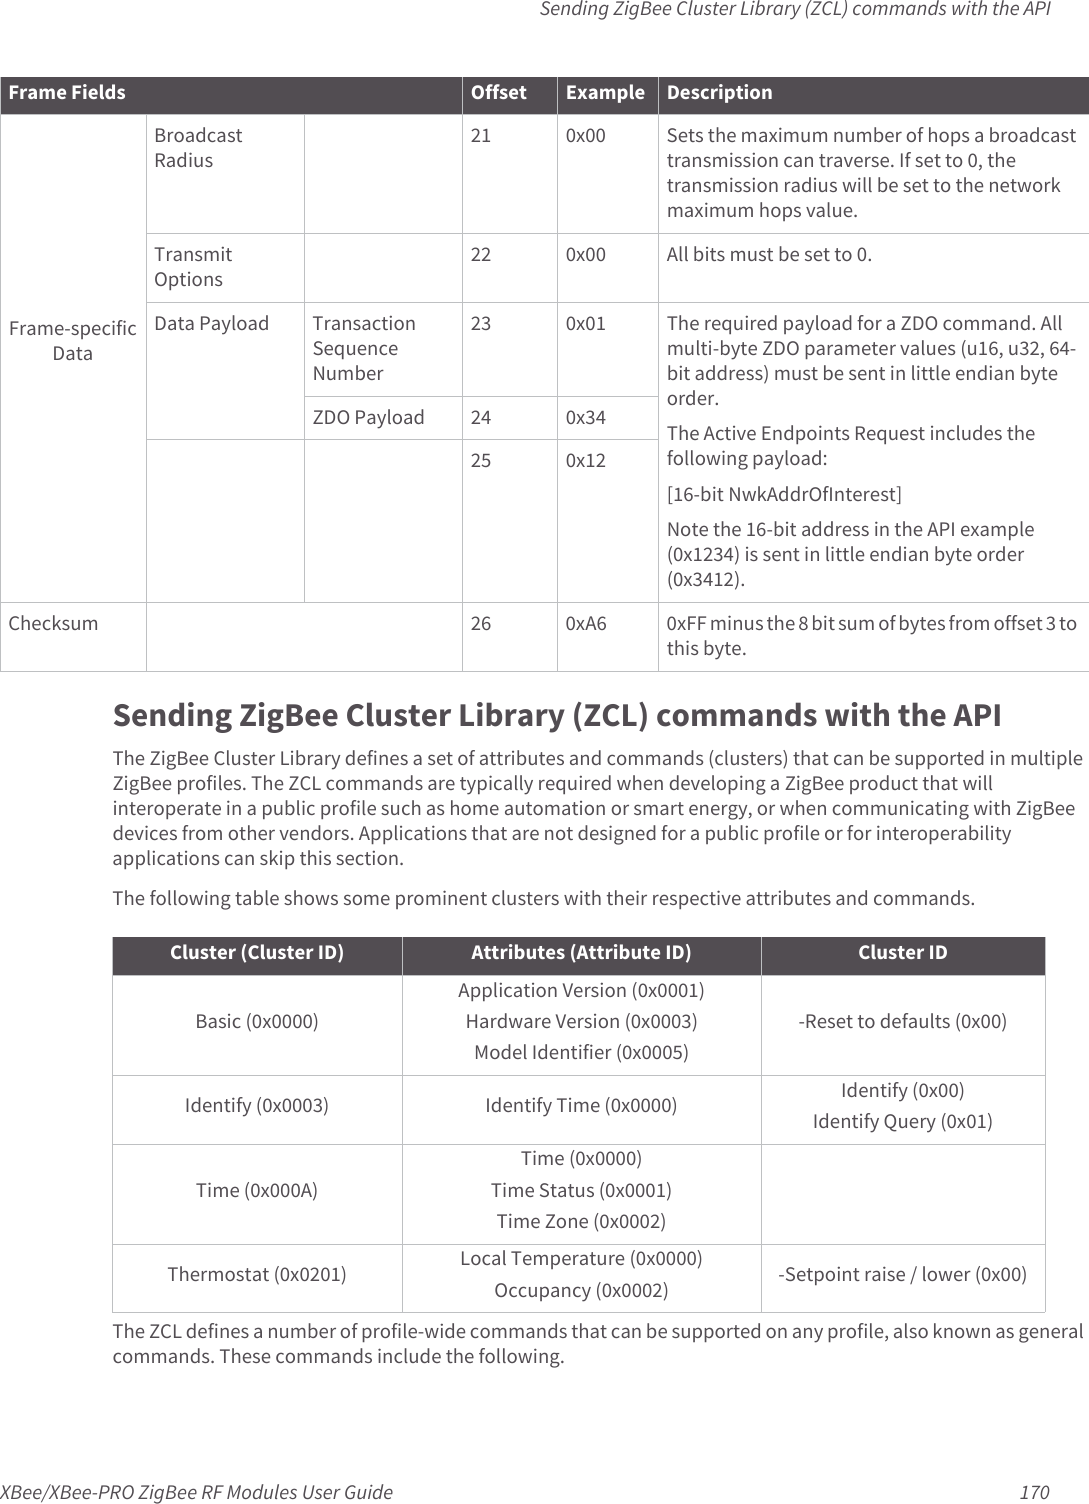 Sending ZigBee Cluster Library (ZCL) commands with the APIXBee/XBee-PRO ZigBee RF Modules User Guide 170Sending ZigBee Cluster Library (ZCL) commands with the APIThe ZigBee Cluster Library defines a set of attributes and commands (clusters) that can be supported in multiple ZigBee profiles. The ZCL commands are typically required when developing a ZigBee product that will interoperate in a public profile such as home automation or smart energy, or when communicating with ZigBee devices from other vendors. Applications that are not designed for a public profile or for interoperability applications can skip this section.The following table shows some prominent clusters with their respective attributes and commands.The ZCL defines a number of profile-wide commands that can be supported on any profile, also known as general commands. These commands include the following.Frame-specific Data Broadcast Radius21 0x00 Sets the maximum number of hops a broadcast transmission can traverse. If set to 0, the transmission radius will be set to the network maximum hops value.Transmit Options22 0x00 All bits must be set to 0.Data Payload Transaction Sequence Number23 0x01 The required payload for a ZDO command. All multi-byte ZDO parameter values (u16, u32, 64-bit address) must be sent in little endian byte order.The Active Endpoints Request includes the following payload:[16-bit NwkAddrOfInterest]Note the 16-bit address in the API example (0x1234) is sent in little endian byte order (0x3412).ZDO Payload 24 0x3425 0x12Checksum 26 0xA6 0xFF minus the 8 bit sum of bytes from offset 3 to this byte.Frame Fields Offset Example DescriptionCluster (Cluster ID) Attributes (Attribute ID) Cluster IDBasic (0x0000)Application Version (0x0001)Hardware Version (0x0003)Model Identifier (0x0005)-Reset to defaults (0x00)Identify (0x0003) Identify Time (0x0000) Identify (0x00)Identify Query (0x01)Time (0x000A)Time (0x0000)Time Status (0x0001)Time Zone (0x0002)Thermostat (0x0201) Local Temperature (0x0000)Occupancy (0x0002) -Setpoint raise / lower (0x00)